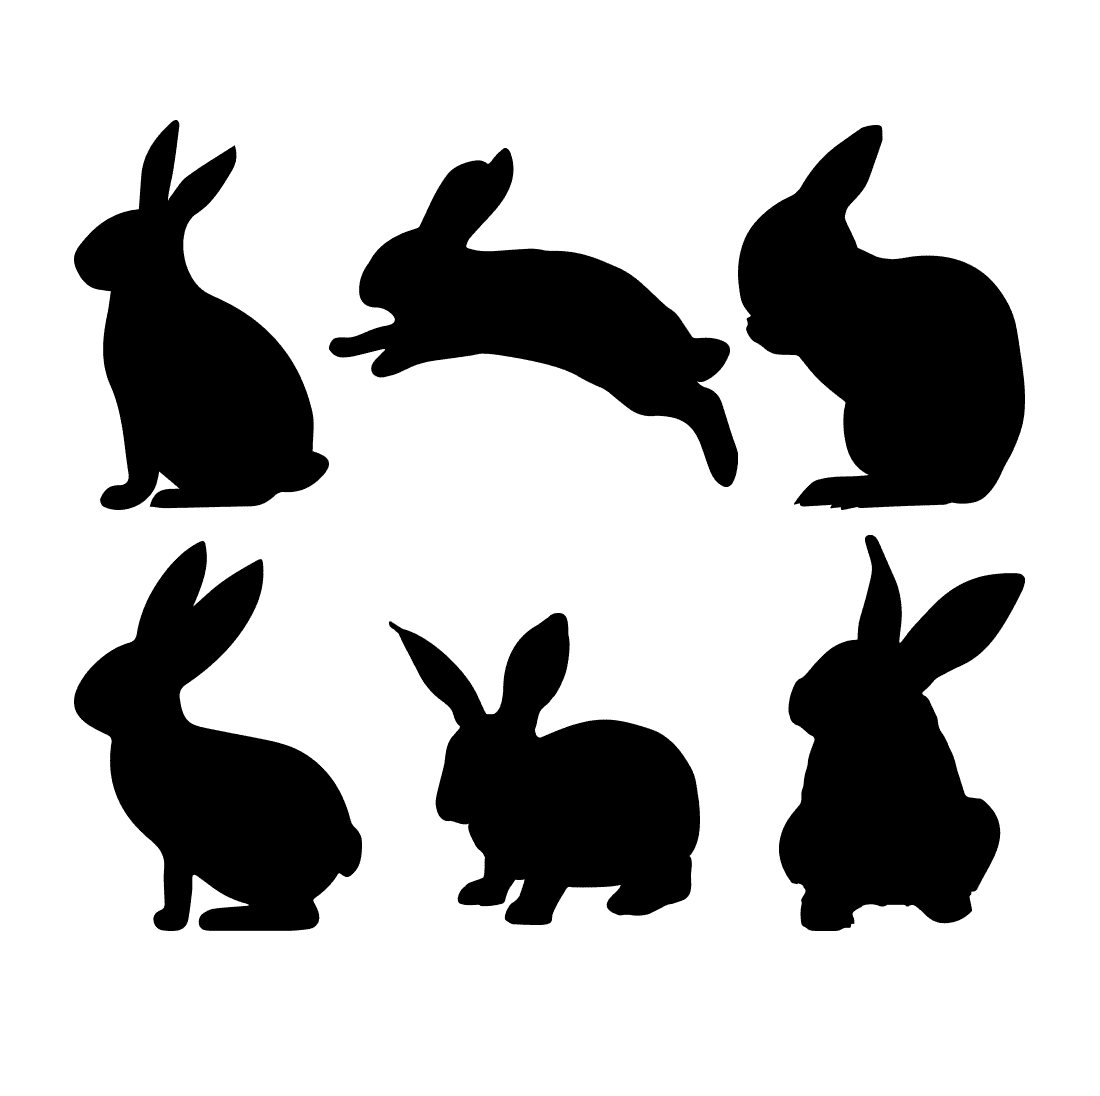 Set of silhouettes of rabbits on a white background.